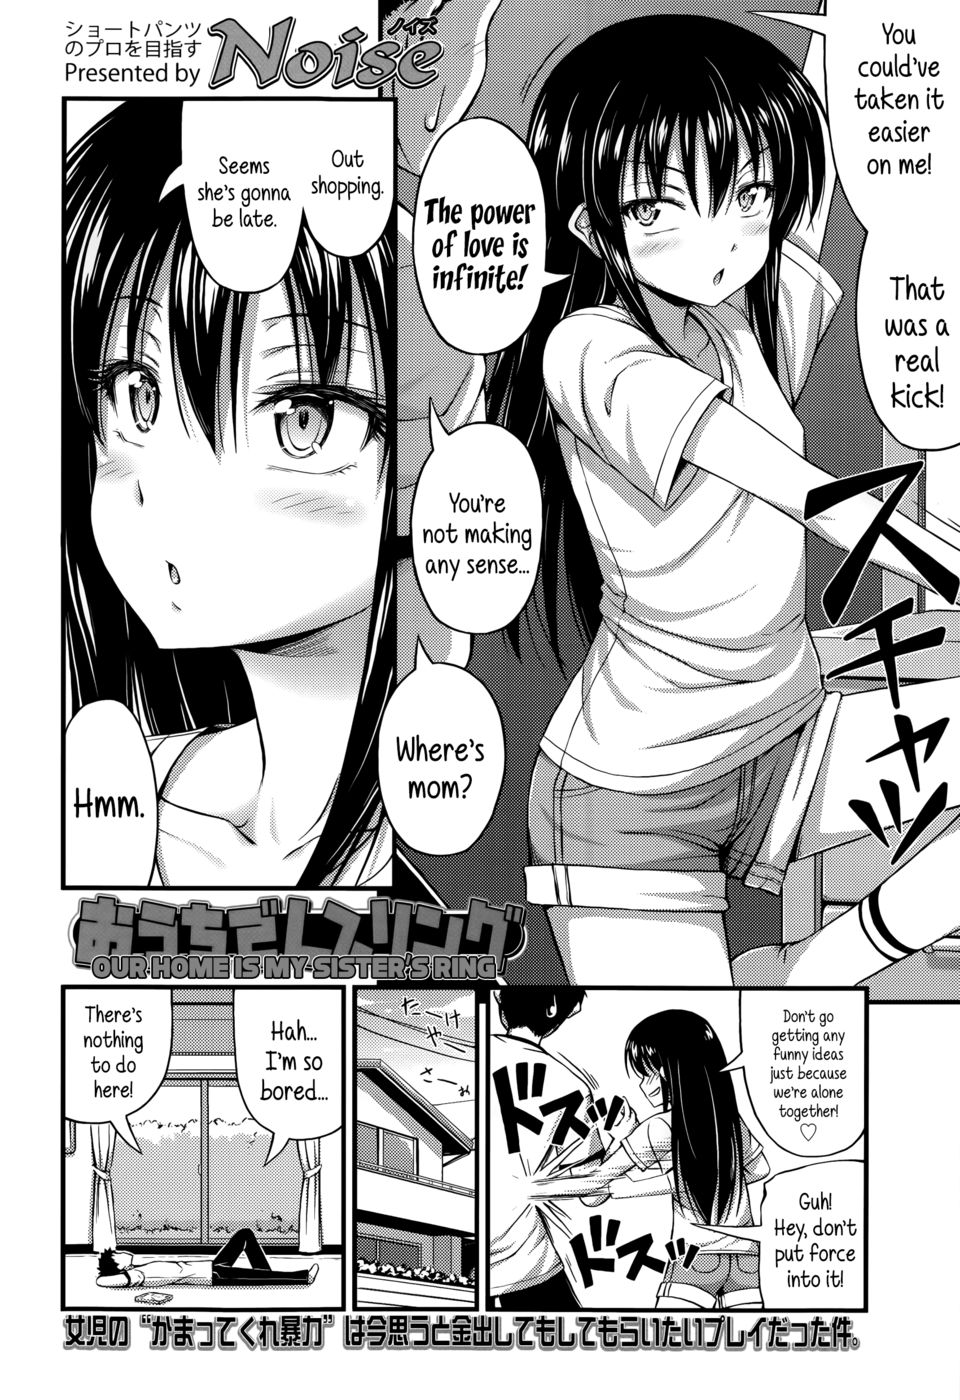 Hentai Manga Comic-Our Home is my Sister's Ring-Read-2